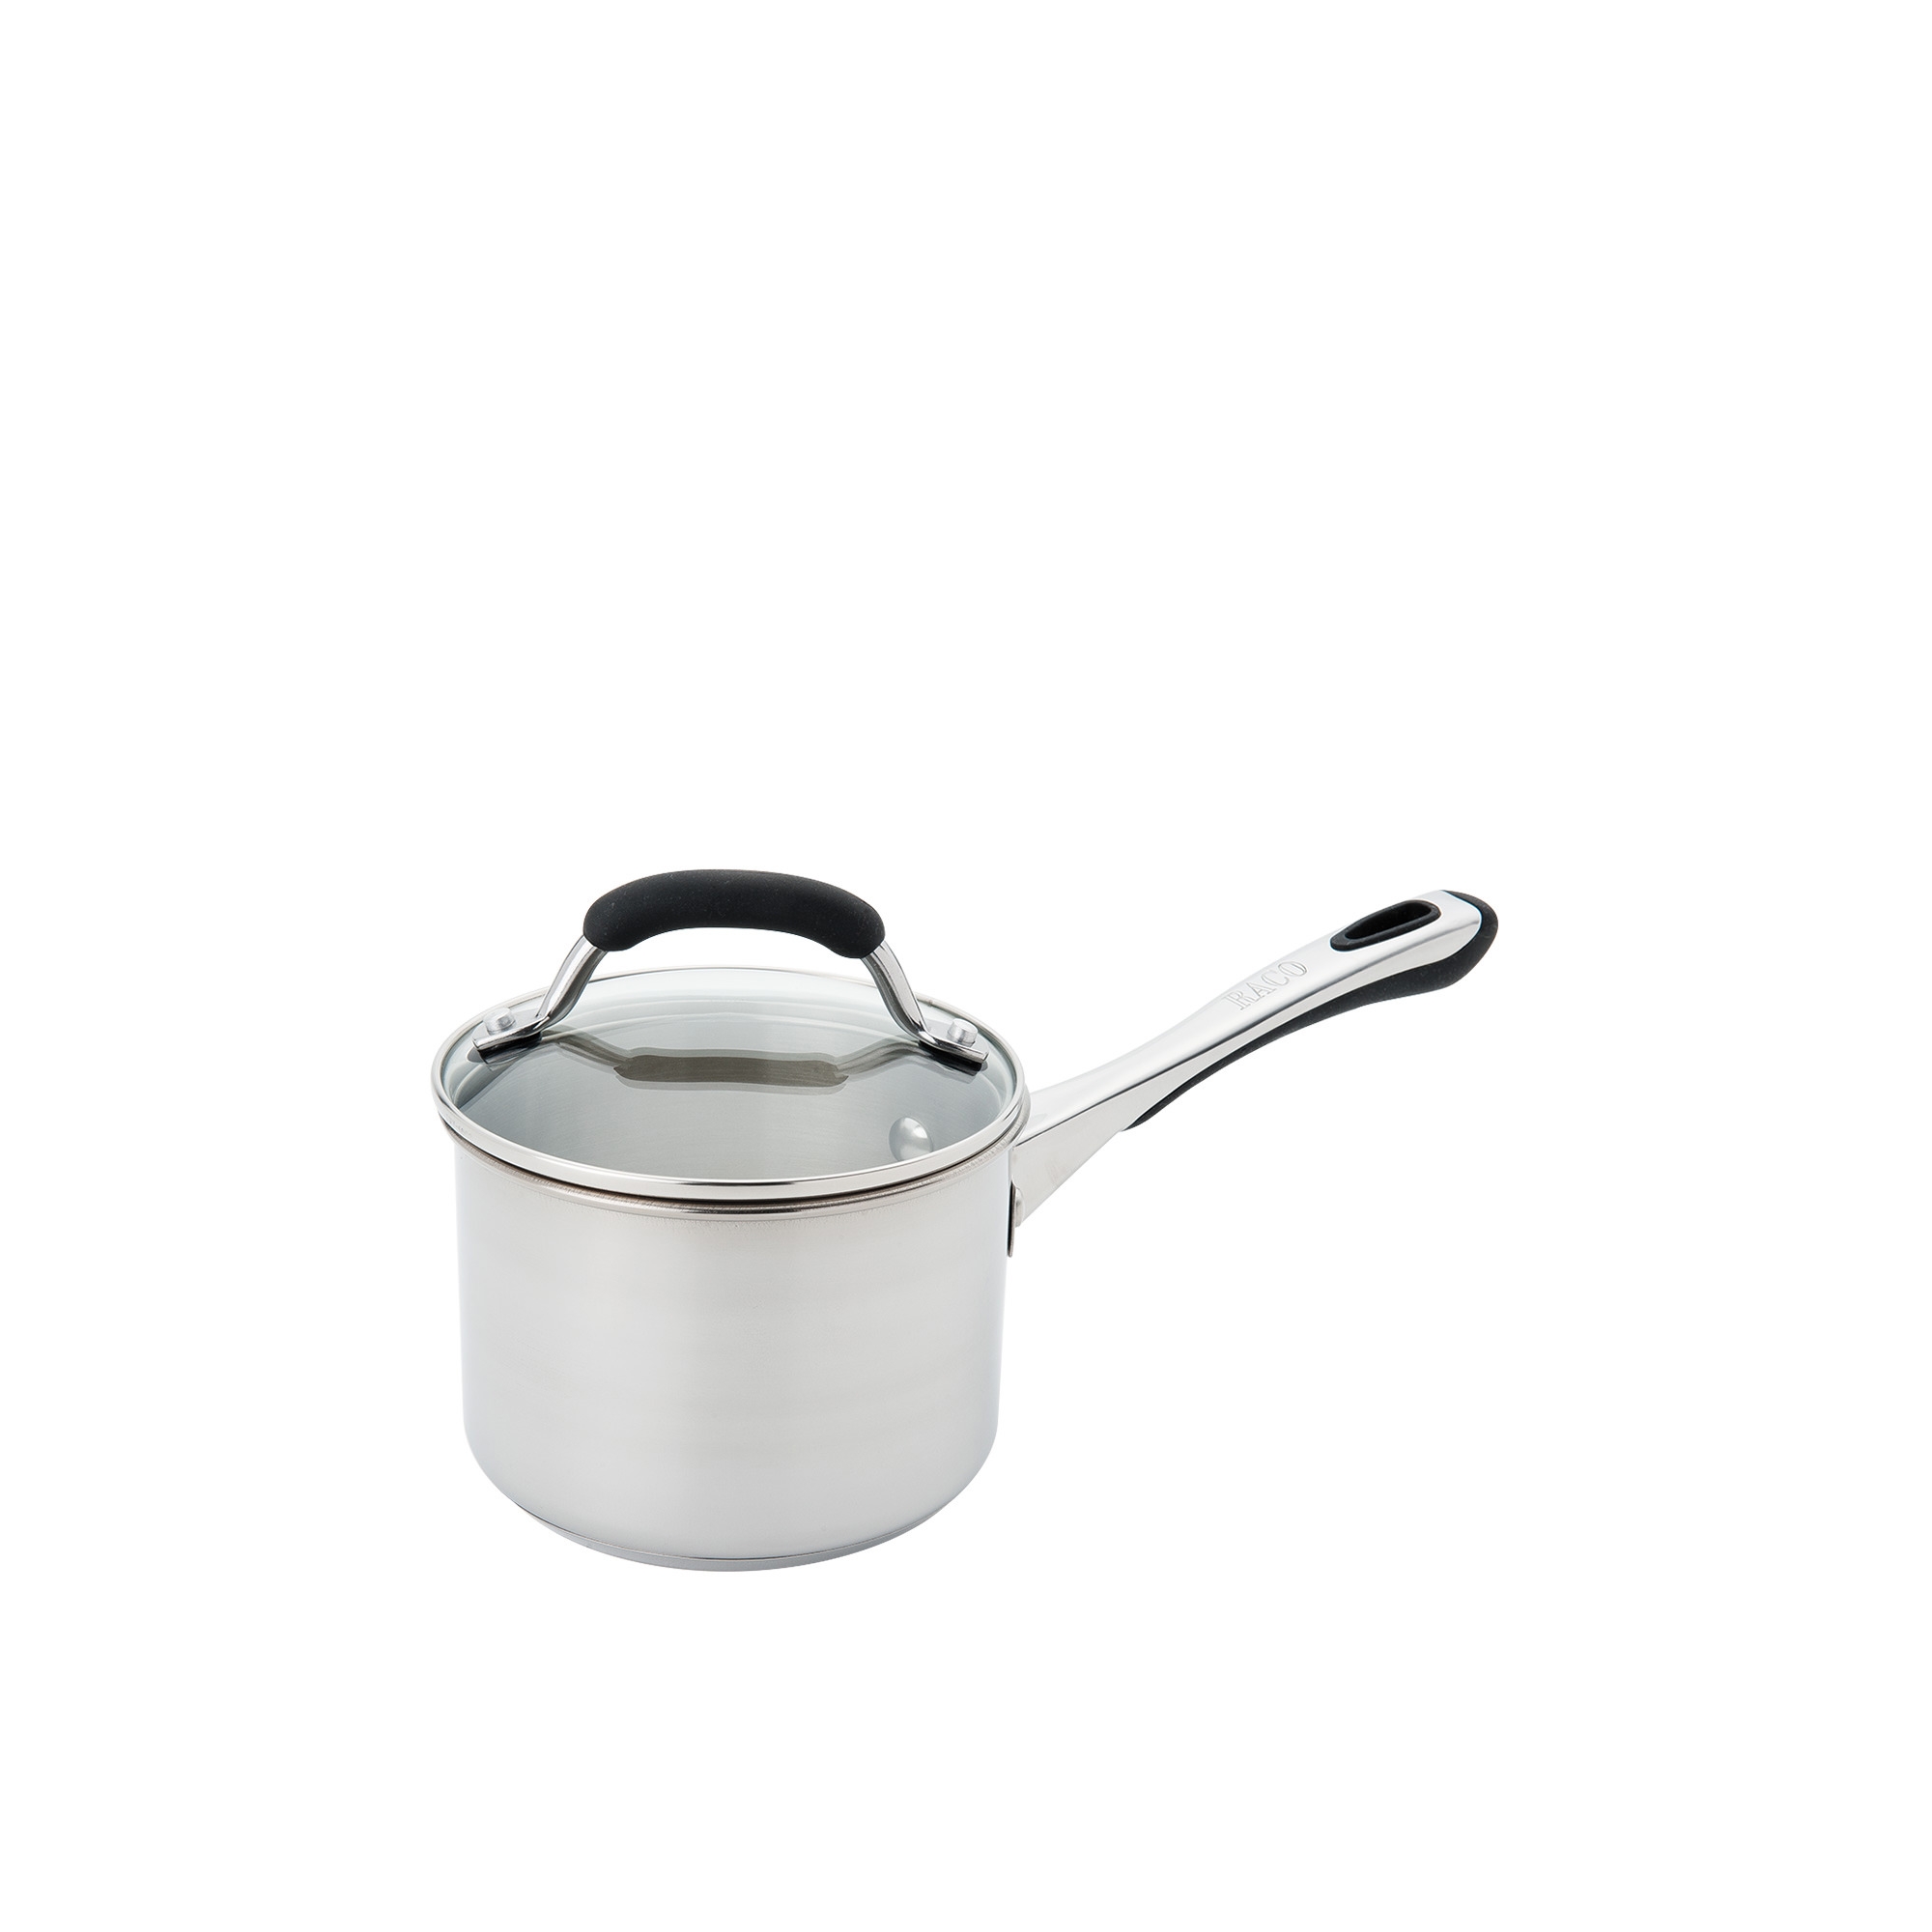 Raco Contemporary Stainless Steel Saucepan 14cm - 1.4L Image 1